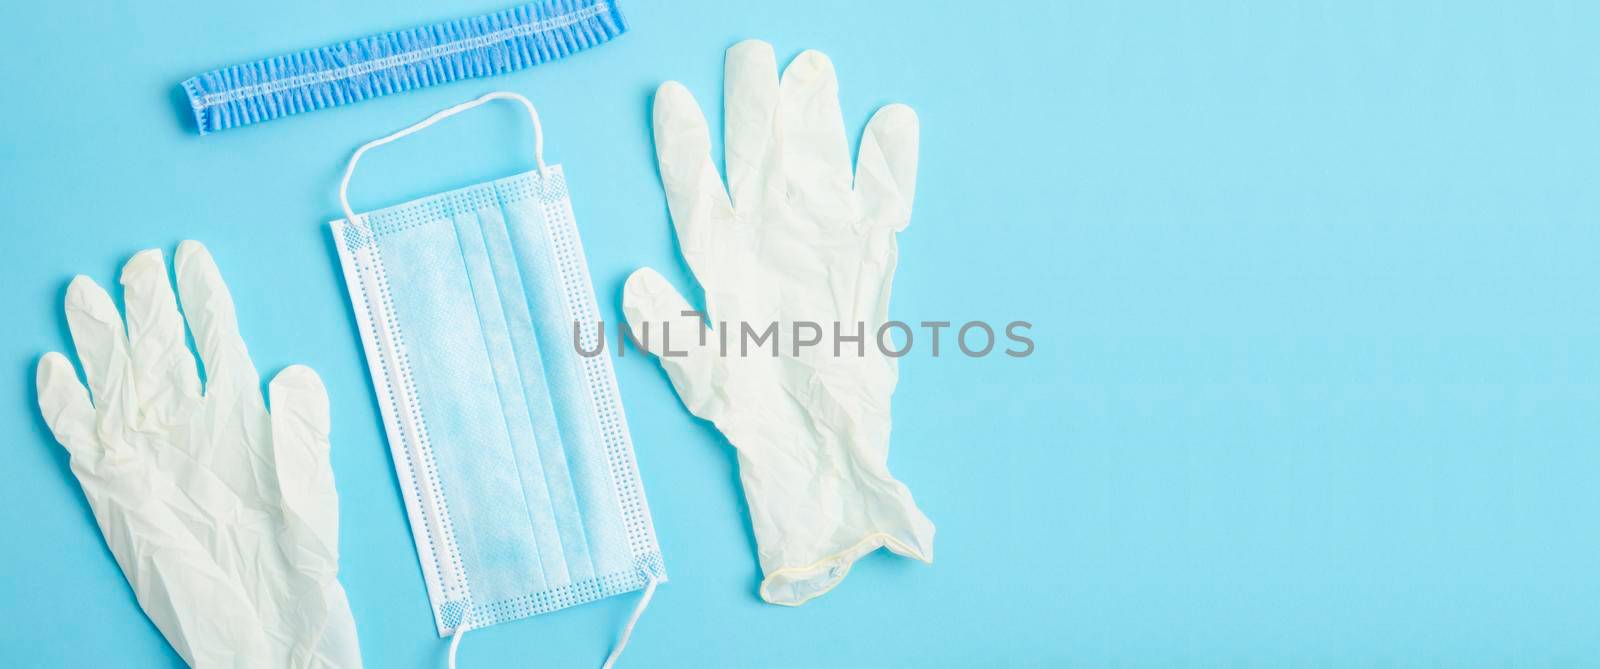 The Medical gear protecting against transmittable diseases, on blue background